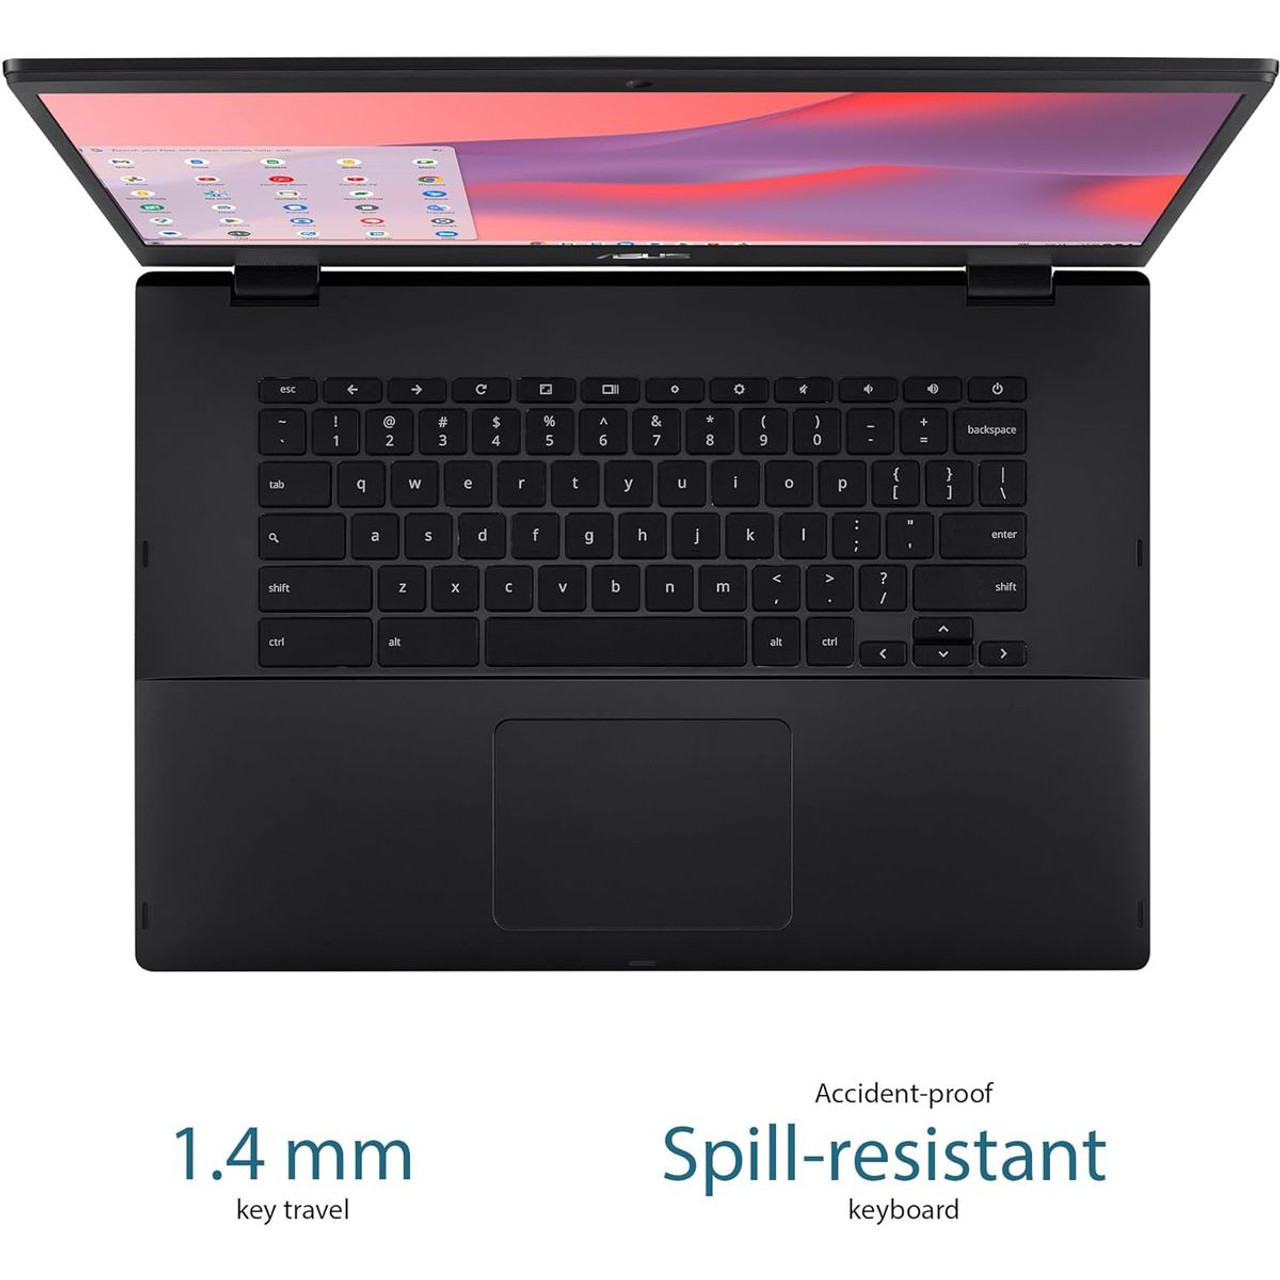 ASUS Chromebook, 15.6-inch FHD N3350 4GB 64GB product image